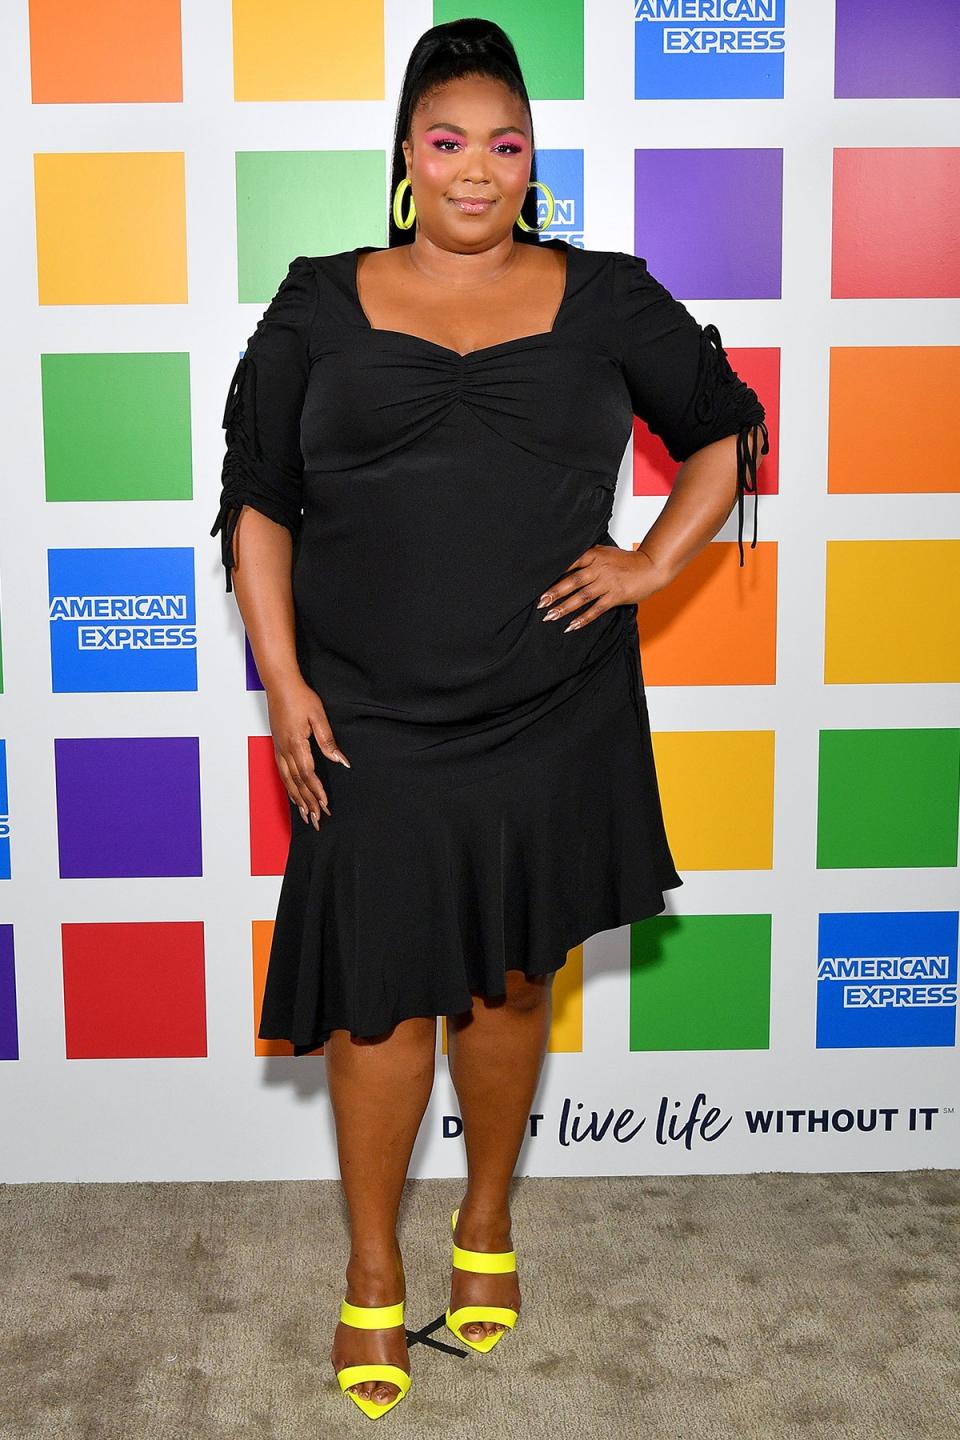 Lizzo Celebrates Pride, Calls Her LGBTQ Fans 'Family': 'That Community Embraced Me as an Ally'